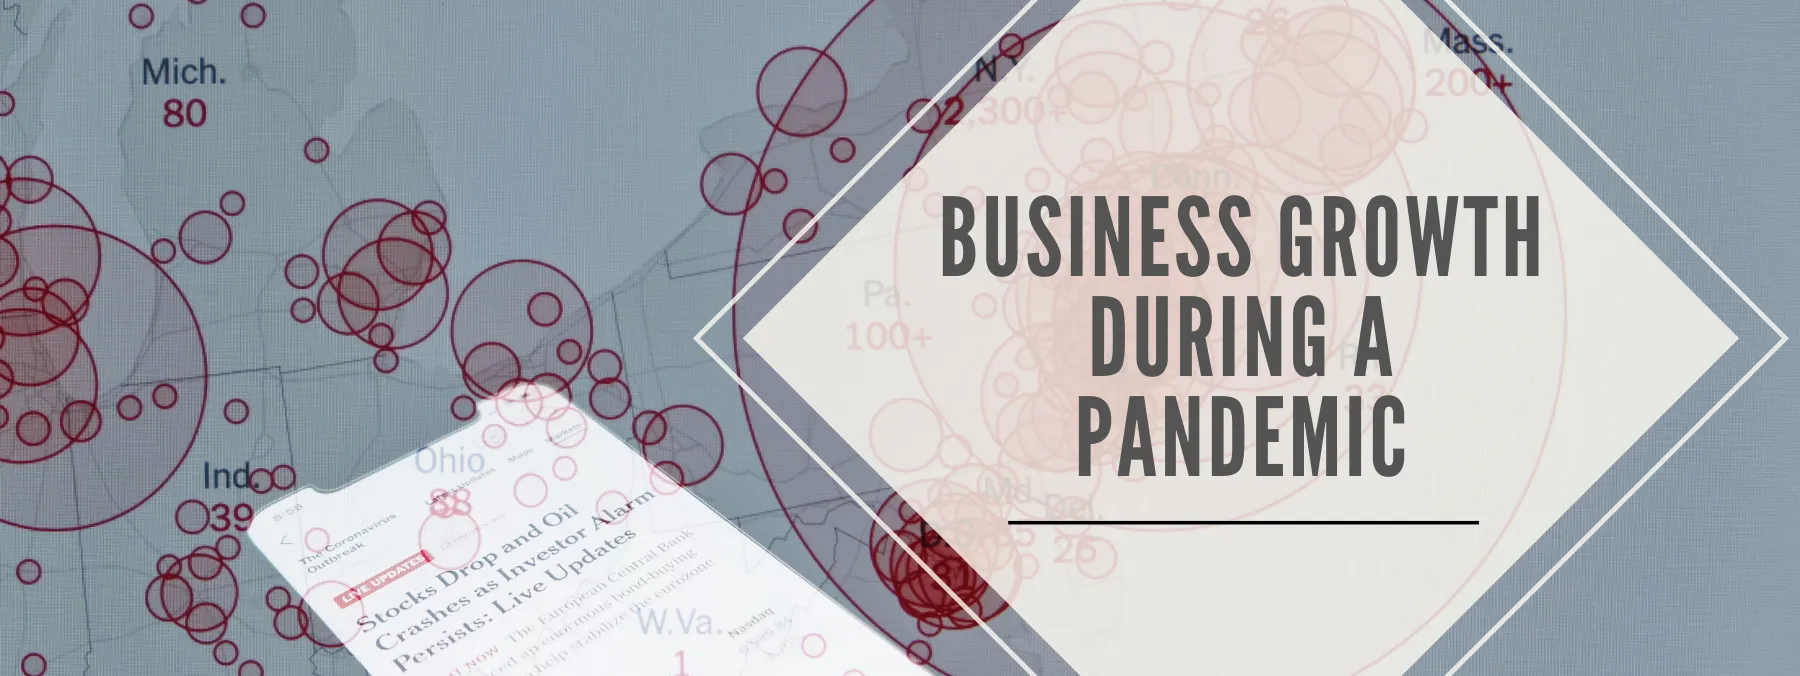 Can You Fuel The Next Wave of Business Growth During a Pandemic?